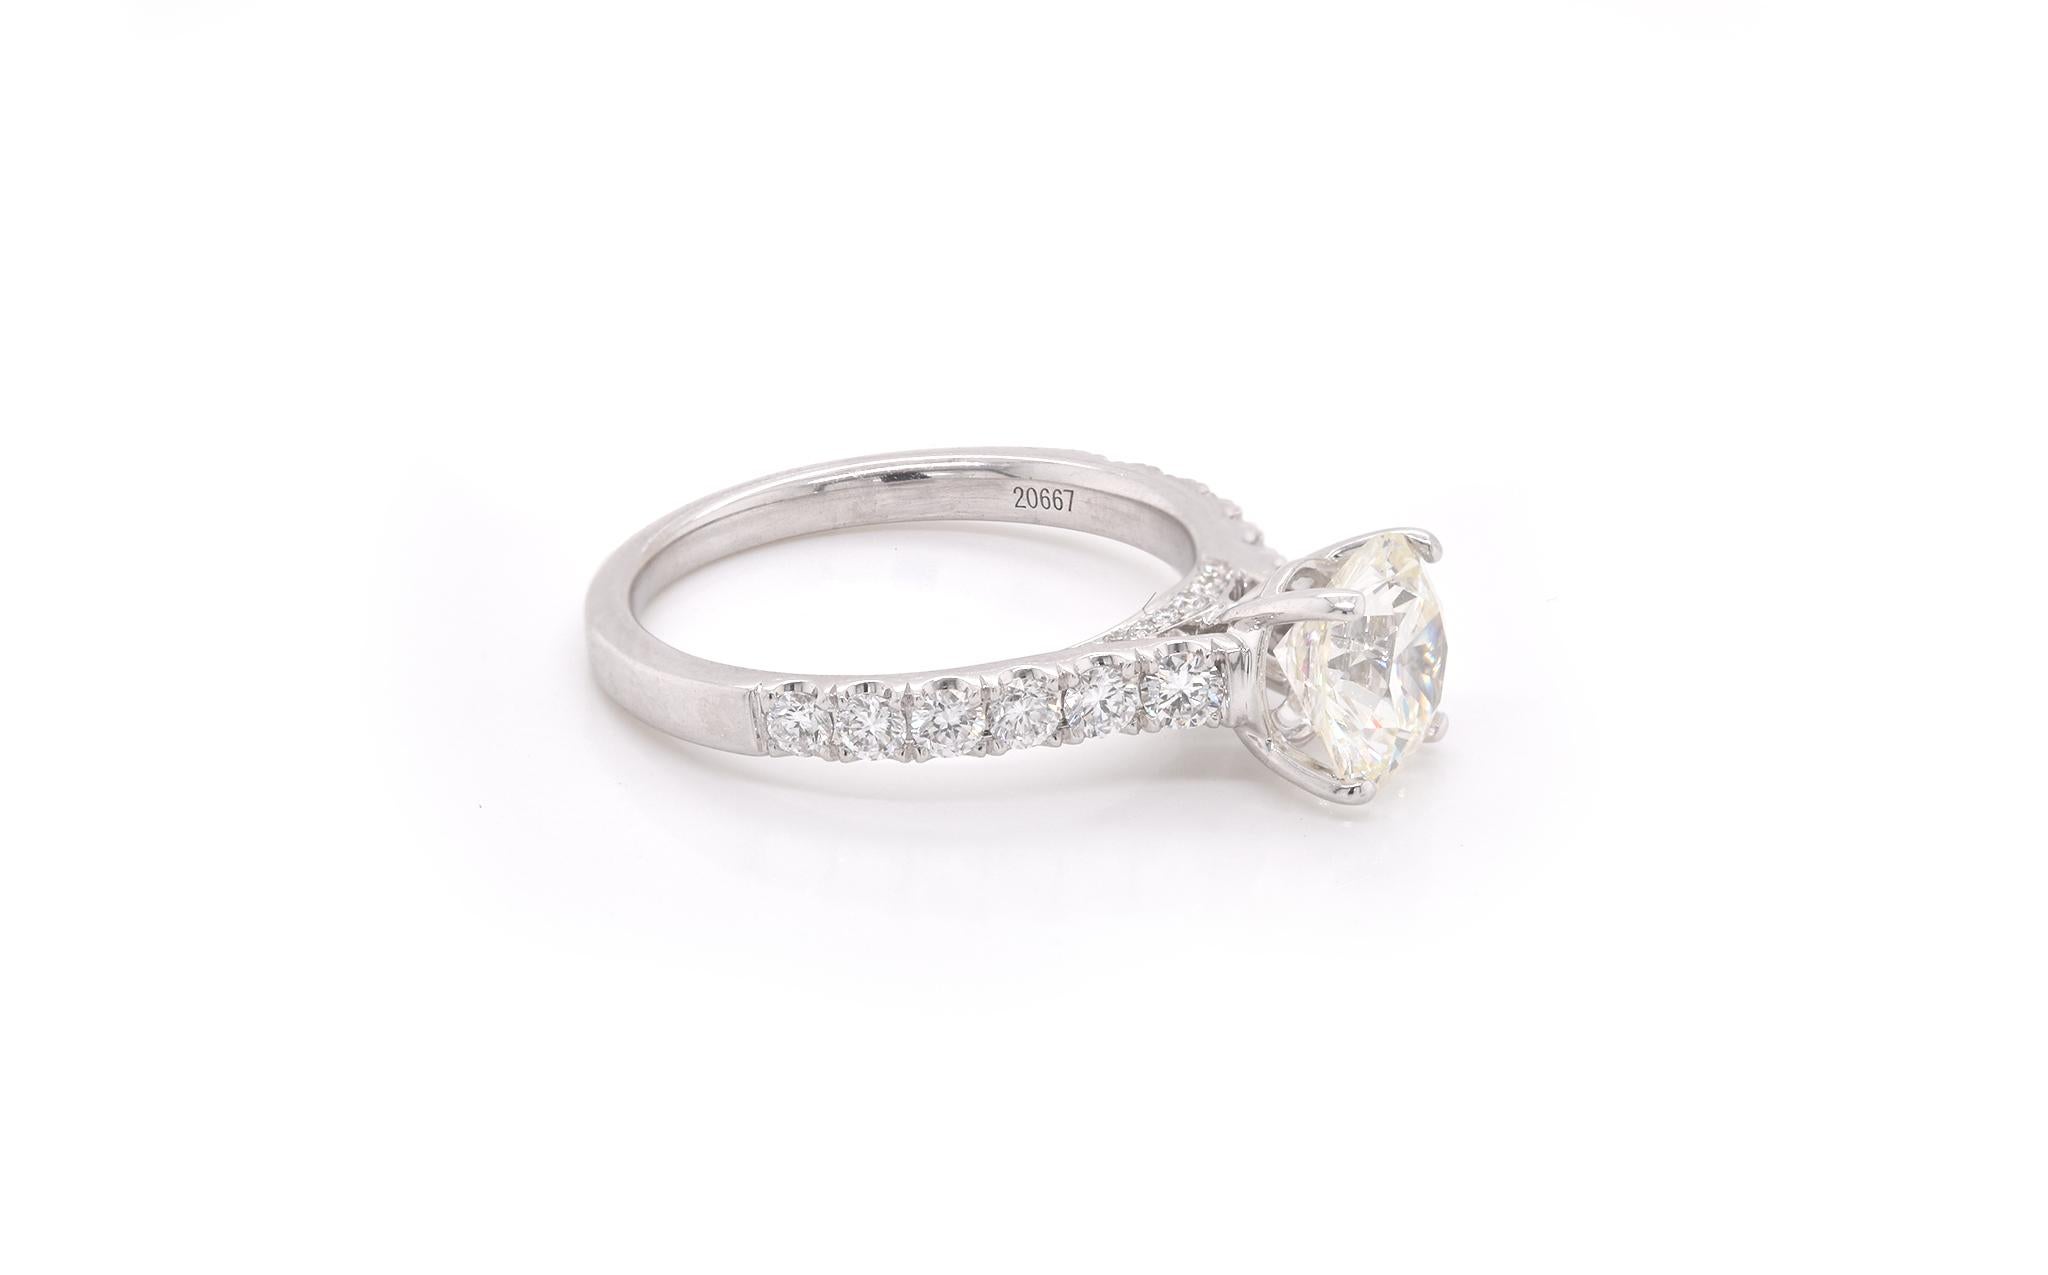 Designer: custom design
Material: 14k white gold 
Center Diamond: 1 round brilliant cut = 1.59ct  
Color: K
Clarity: VVS2
Diamonds: 18 round = 0.54ct
Color: G
Clarity: VS2
Ring Size: 6 ½ (please allow two additional shipping days for sizing